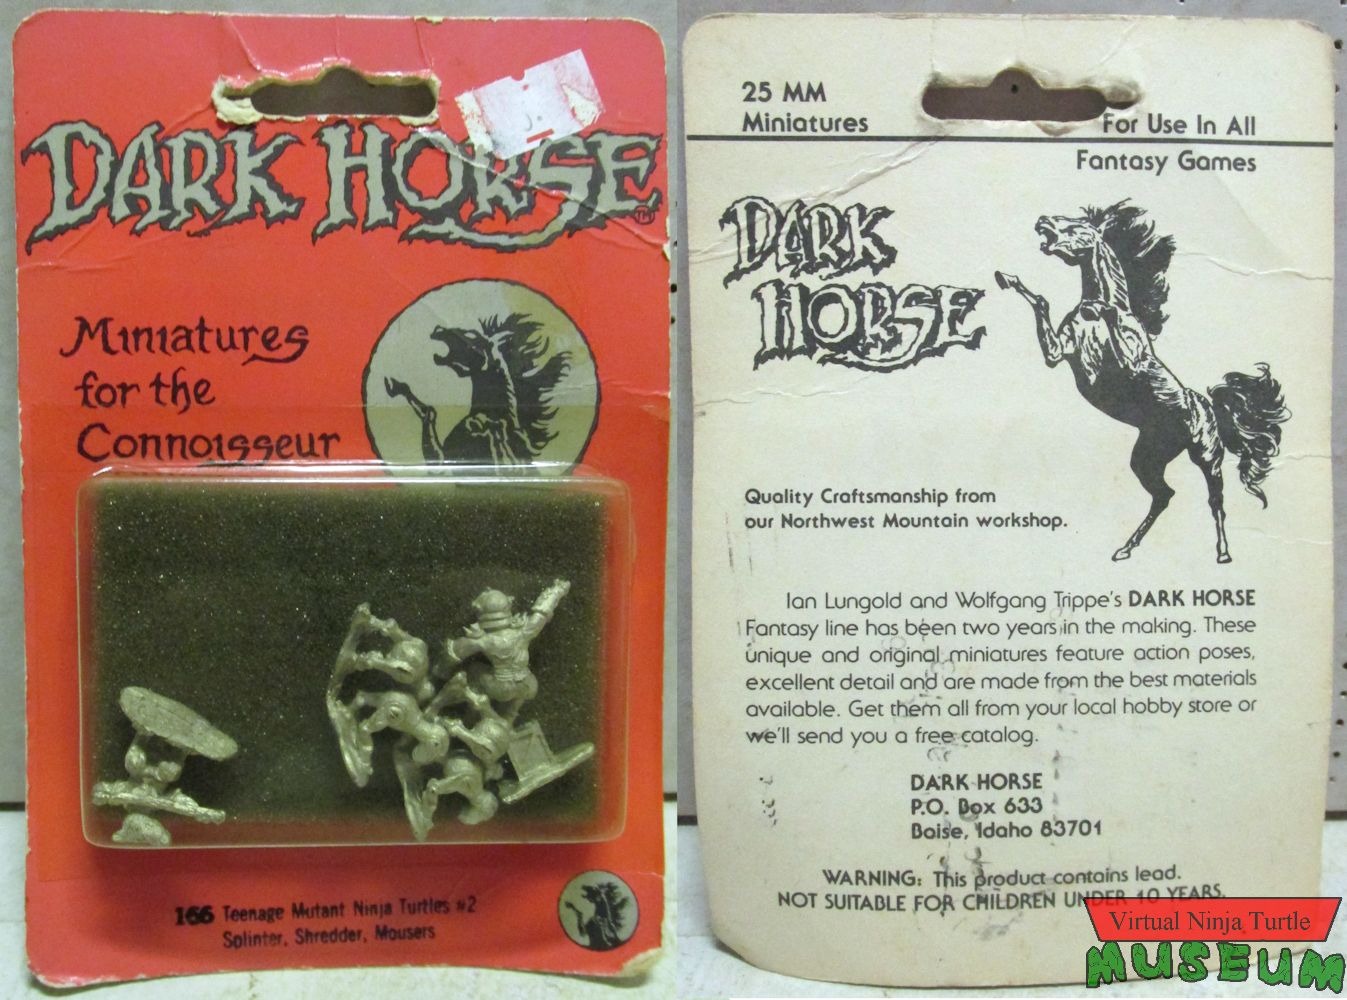 Dark Horse Card front and back